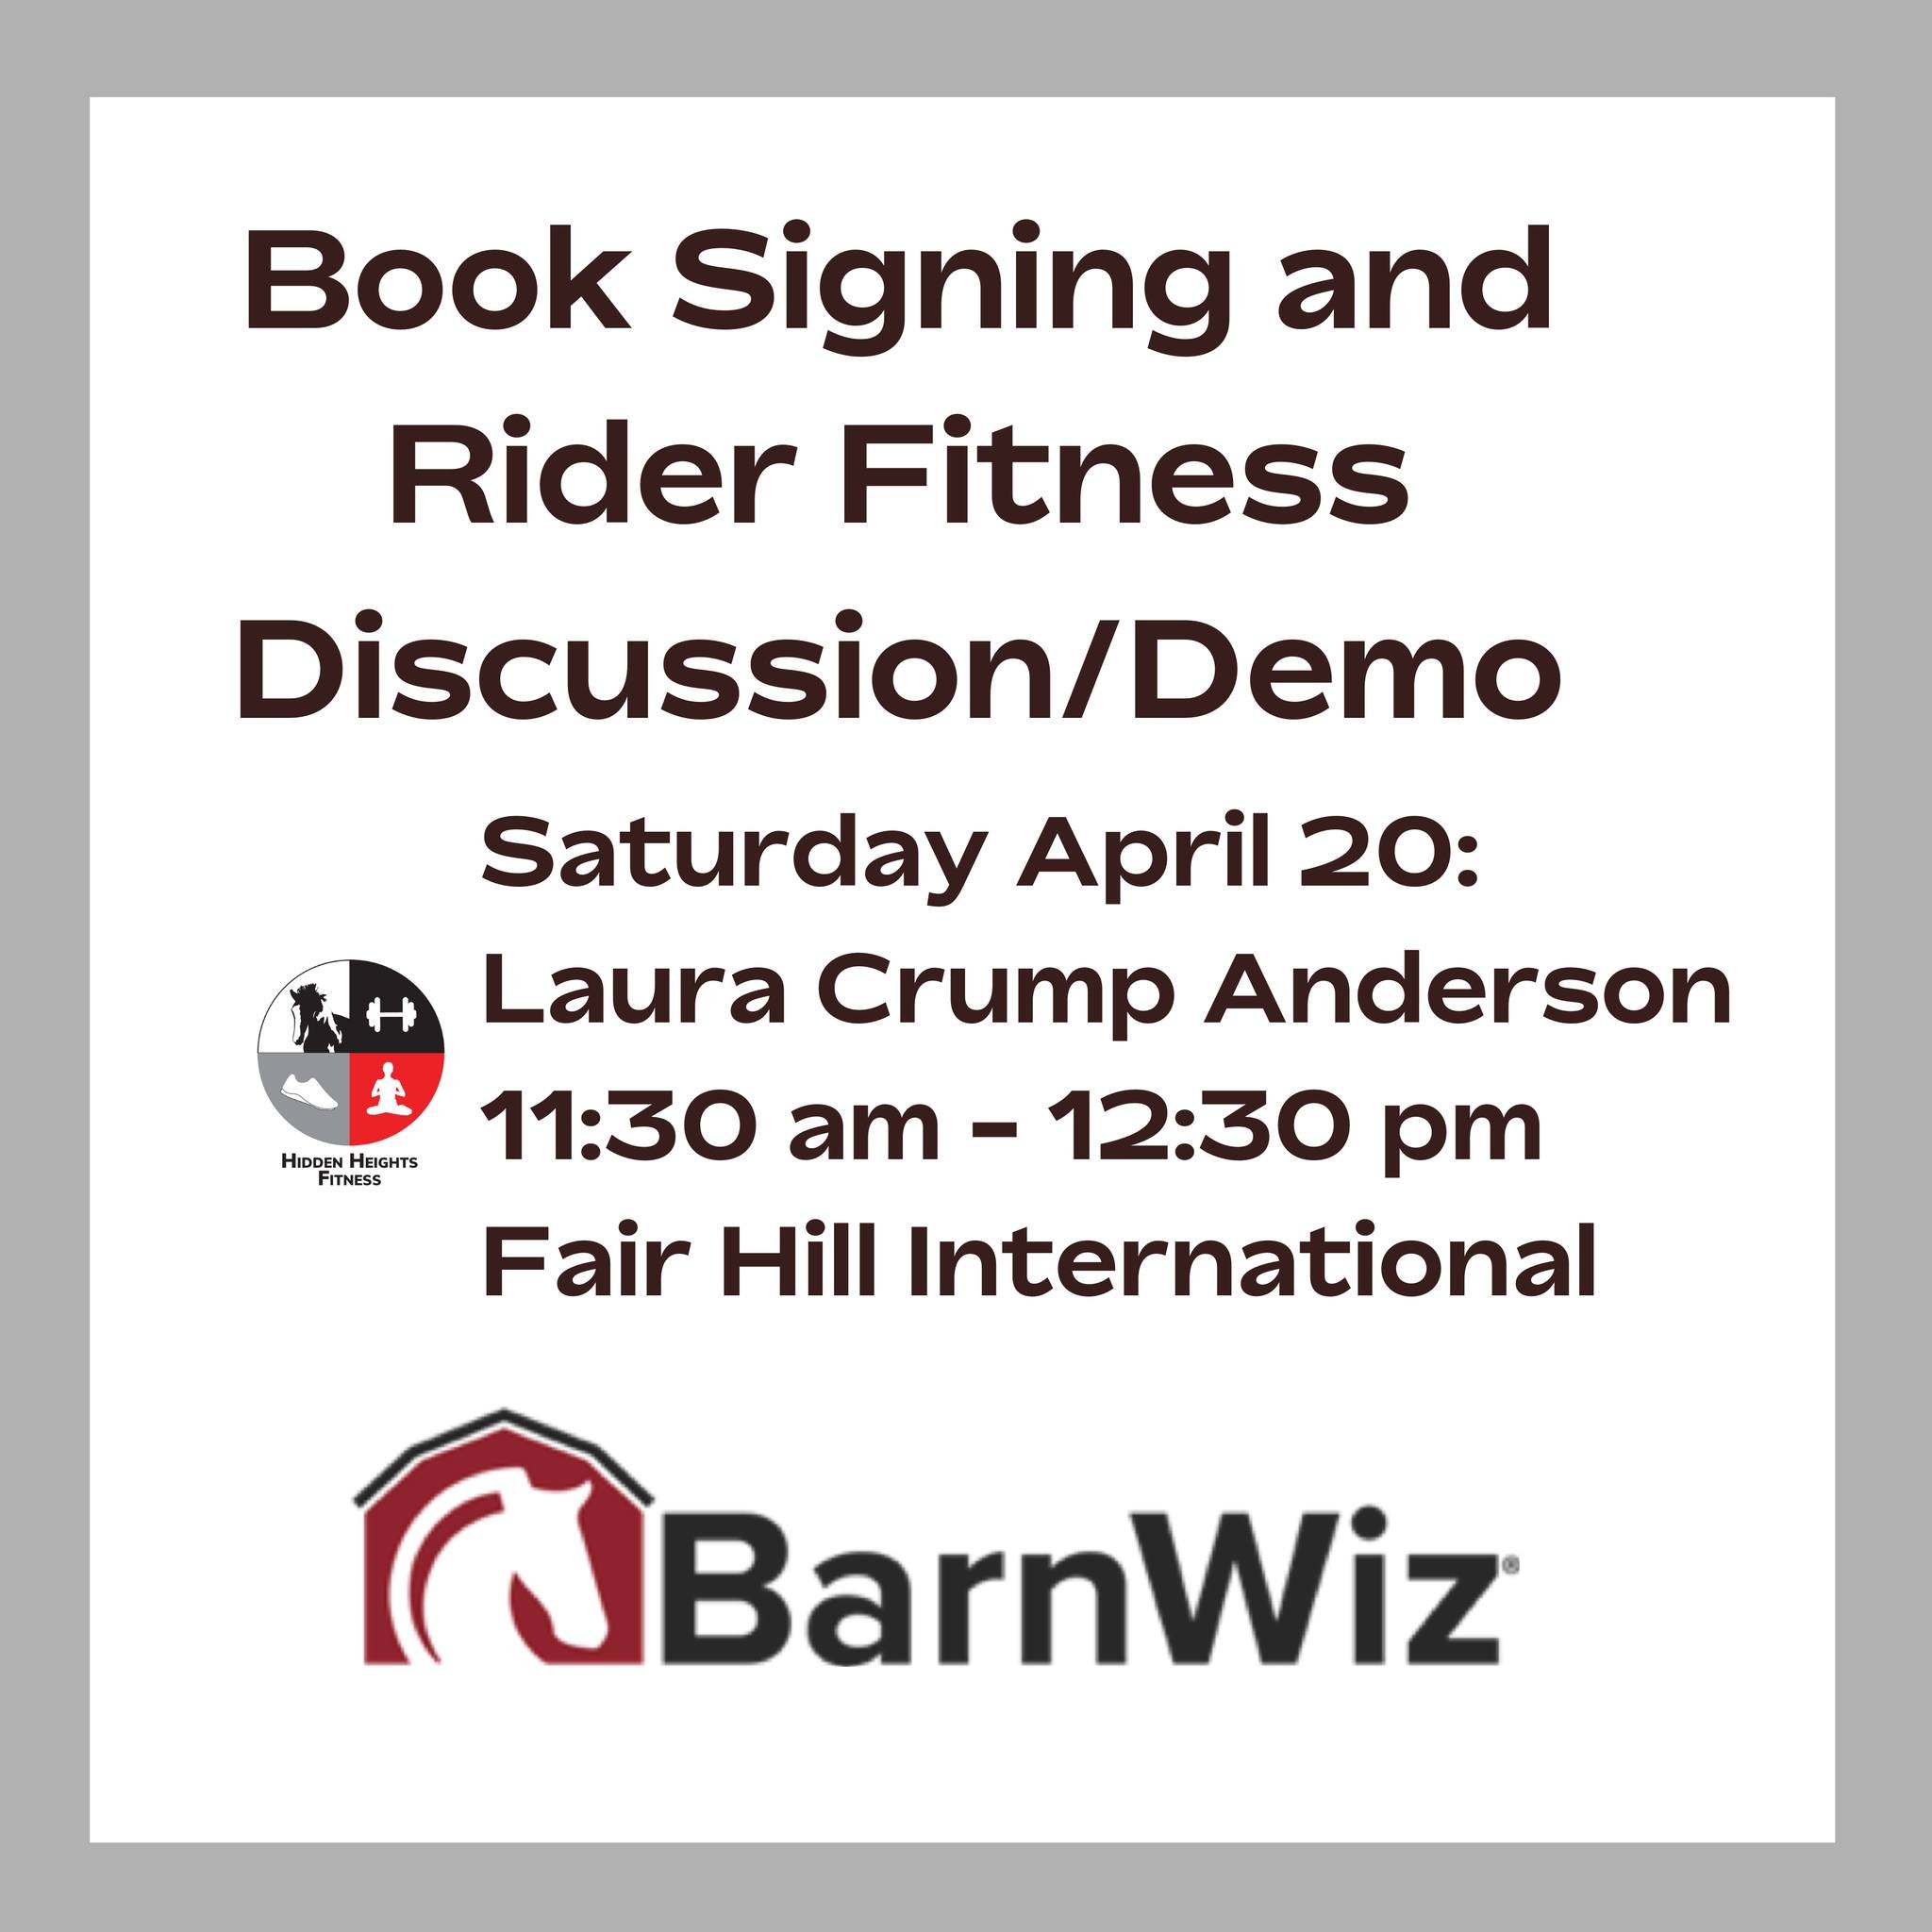 TOMORROW: Meet the Author, @lauracrumpanderson  with @horseandriderbooks and blogger for @goeventing at the BarnWiz Tent in the vendor area at the Fair Hill International @fairhillint 

We are celebrating the launch of the BarnWiz App all weekend and